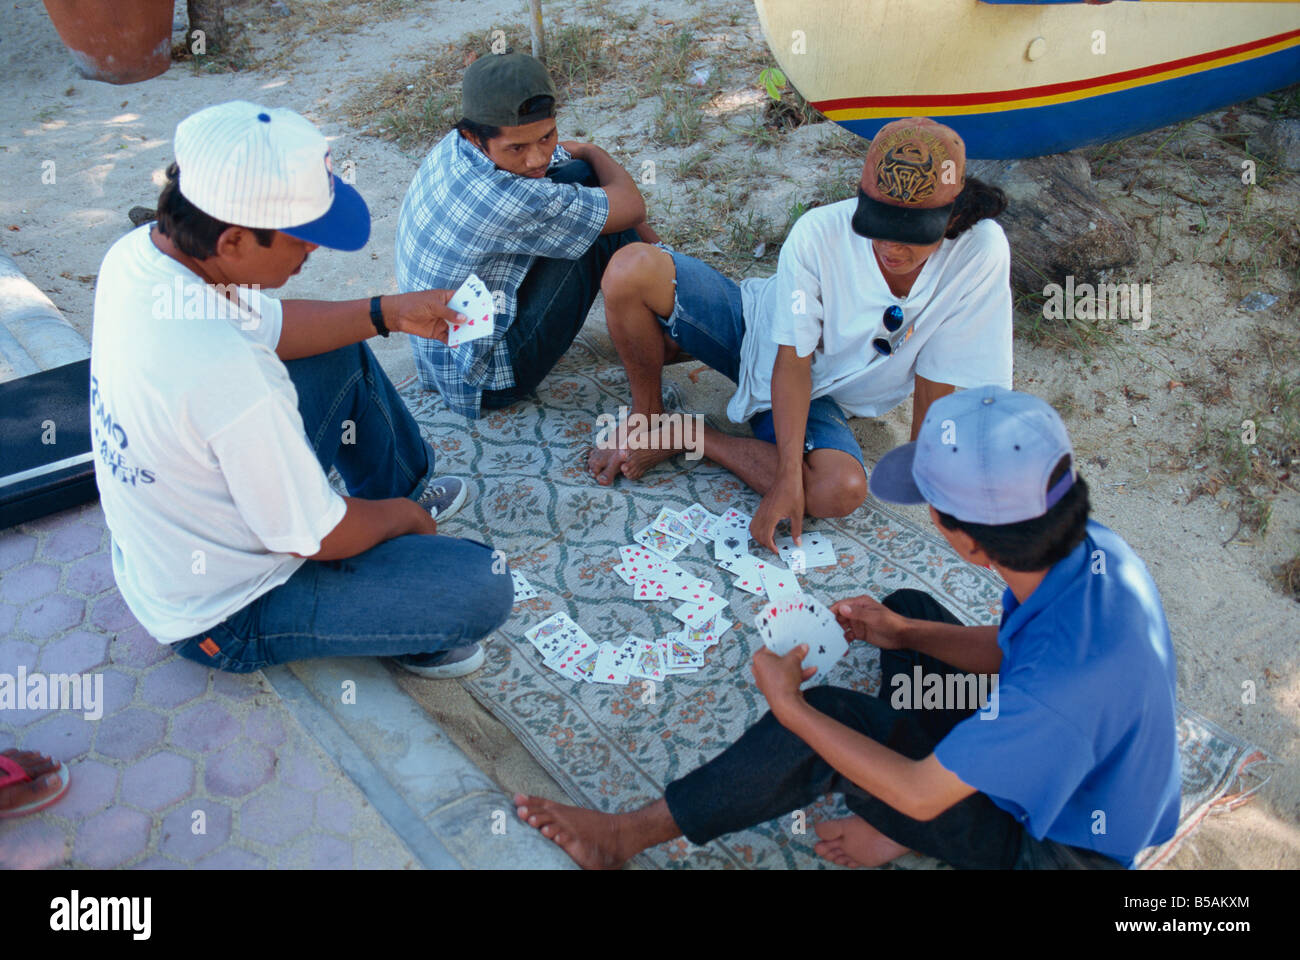 Locals playing cards, Bali, Indonesia, Southeast Asia Stock Photo